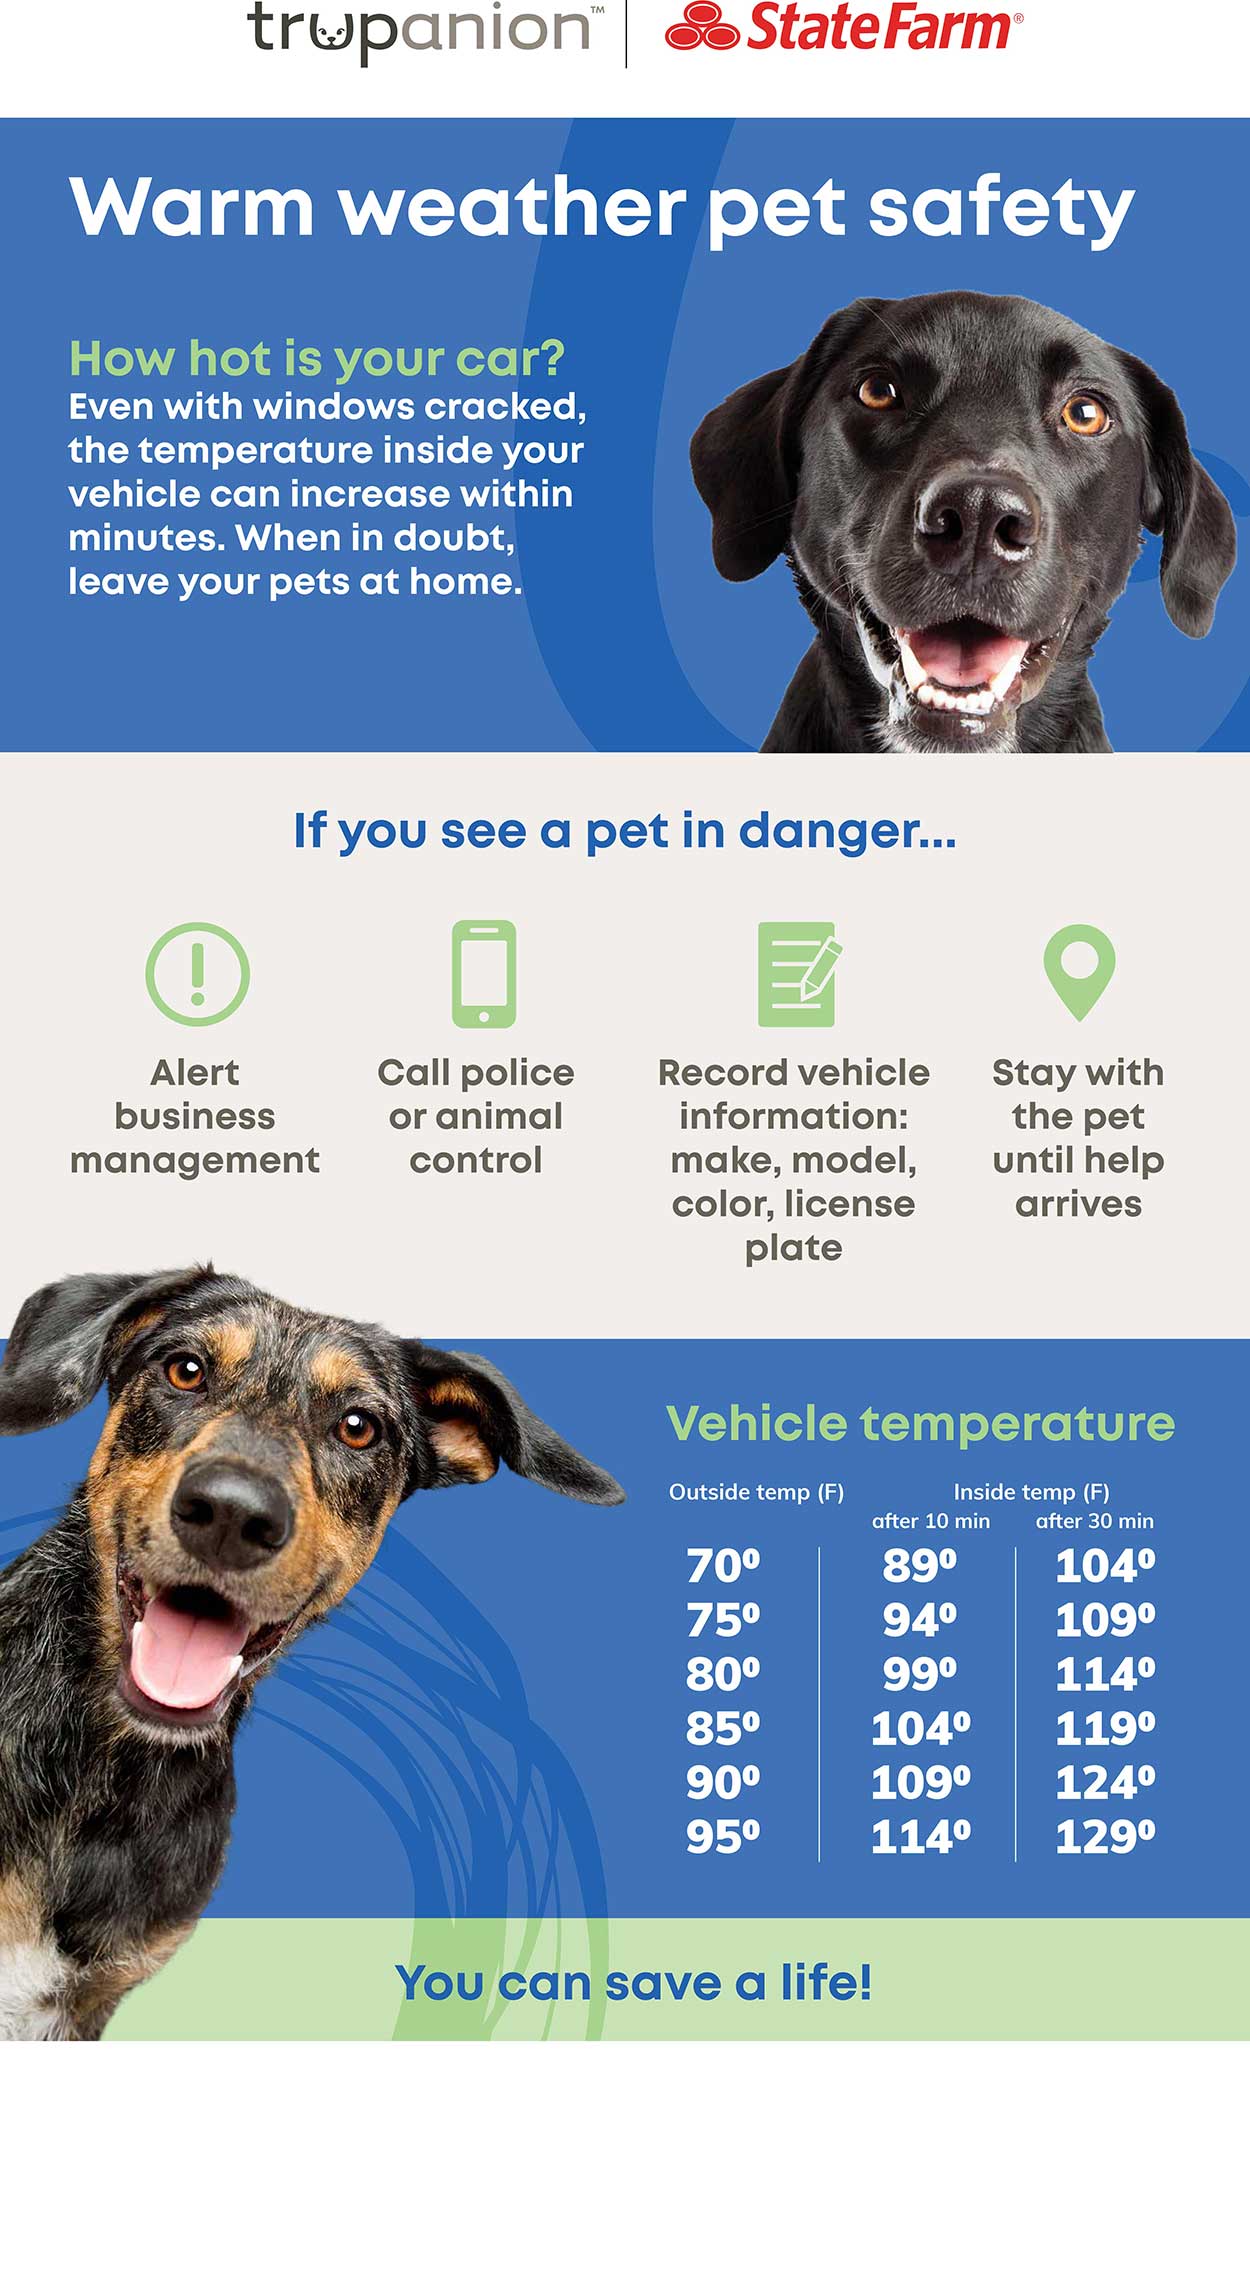 pets in hot cars